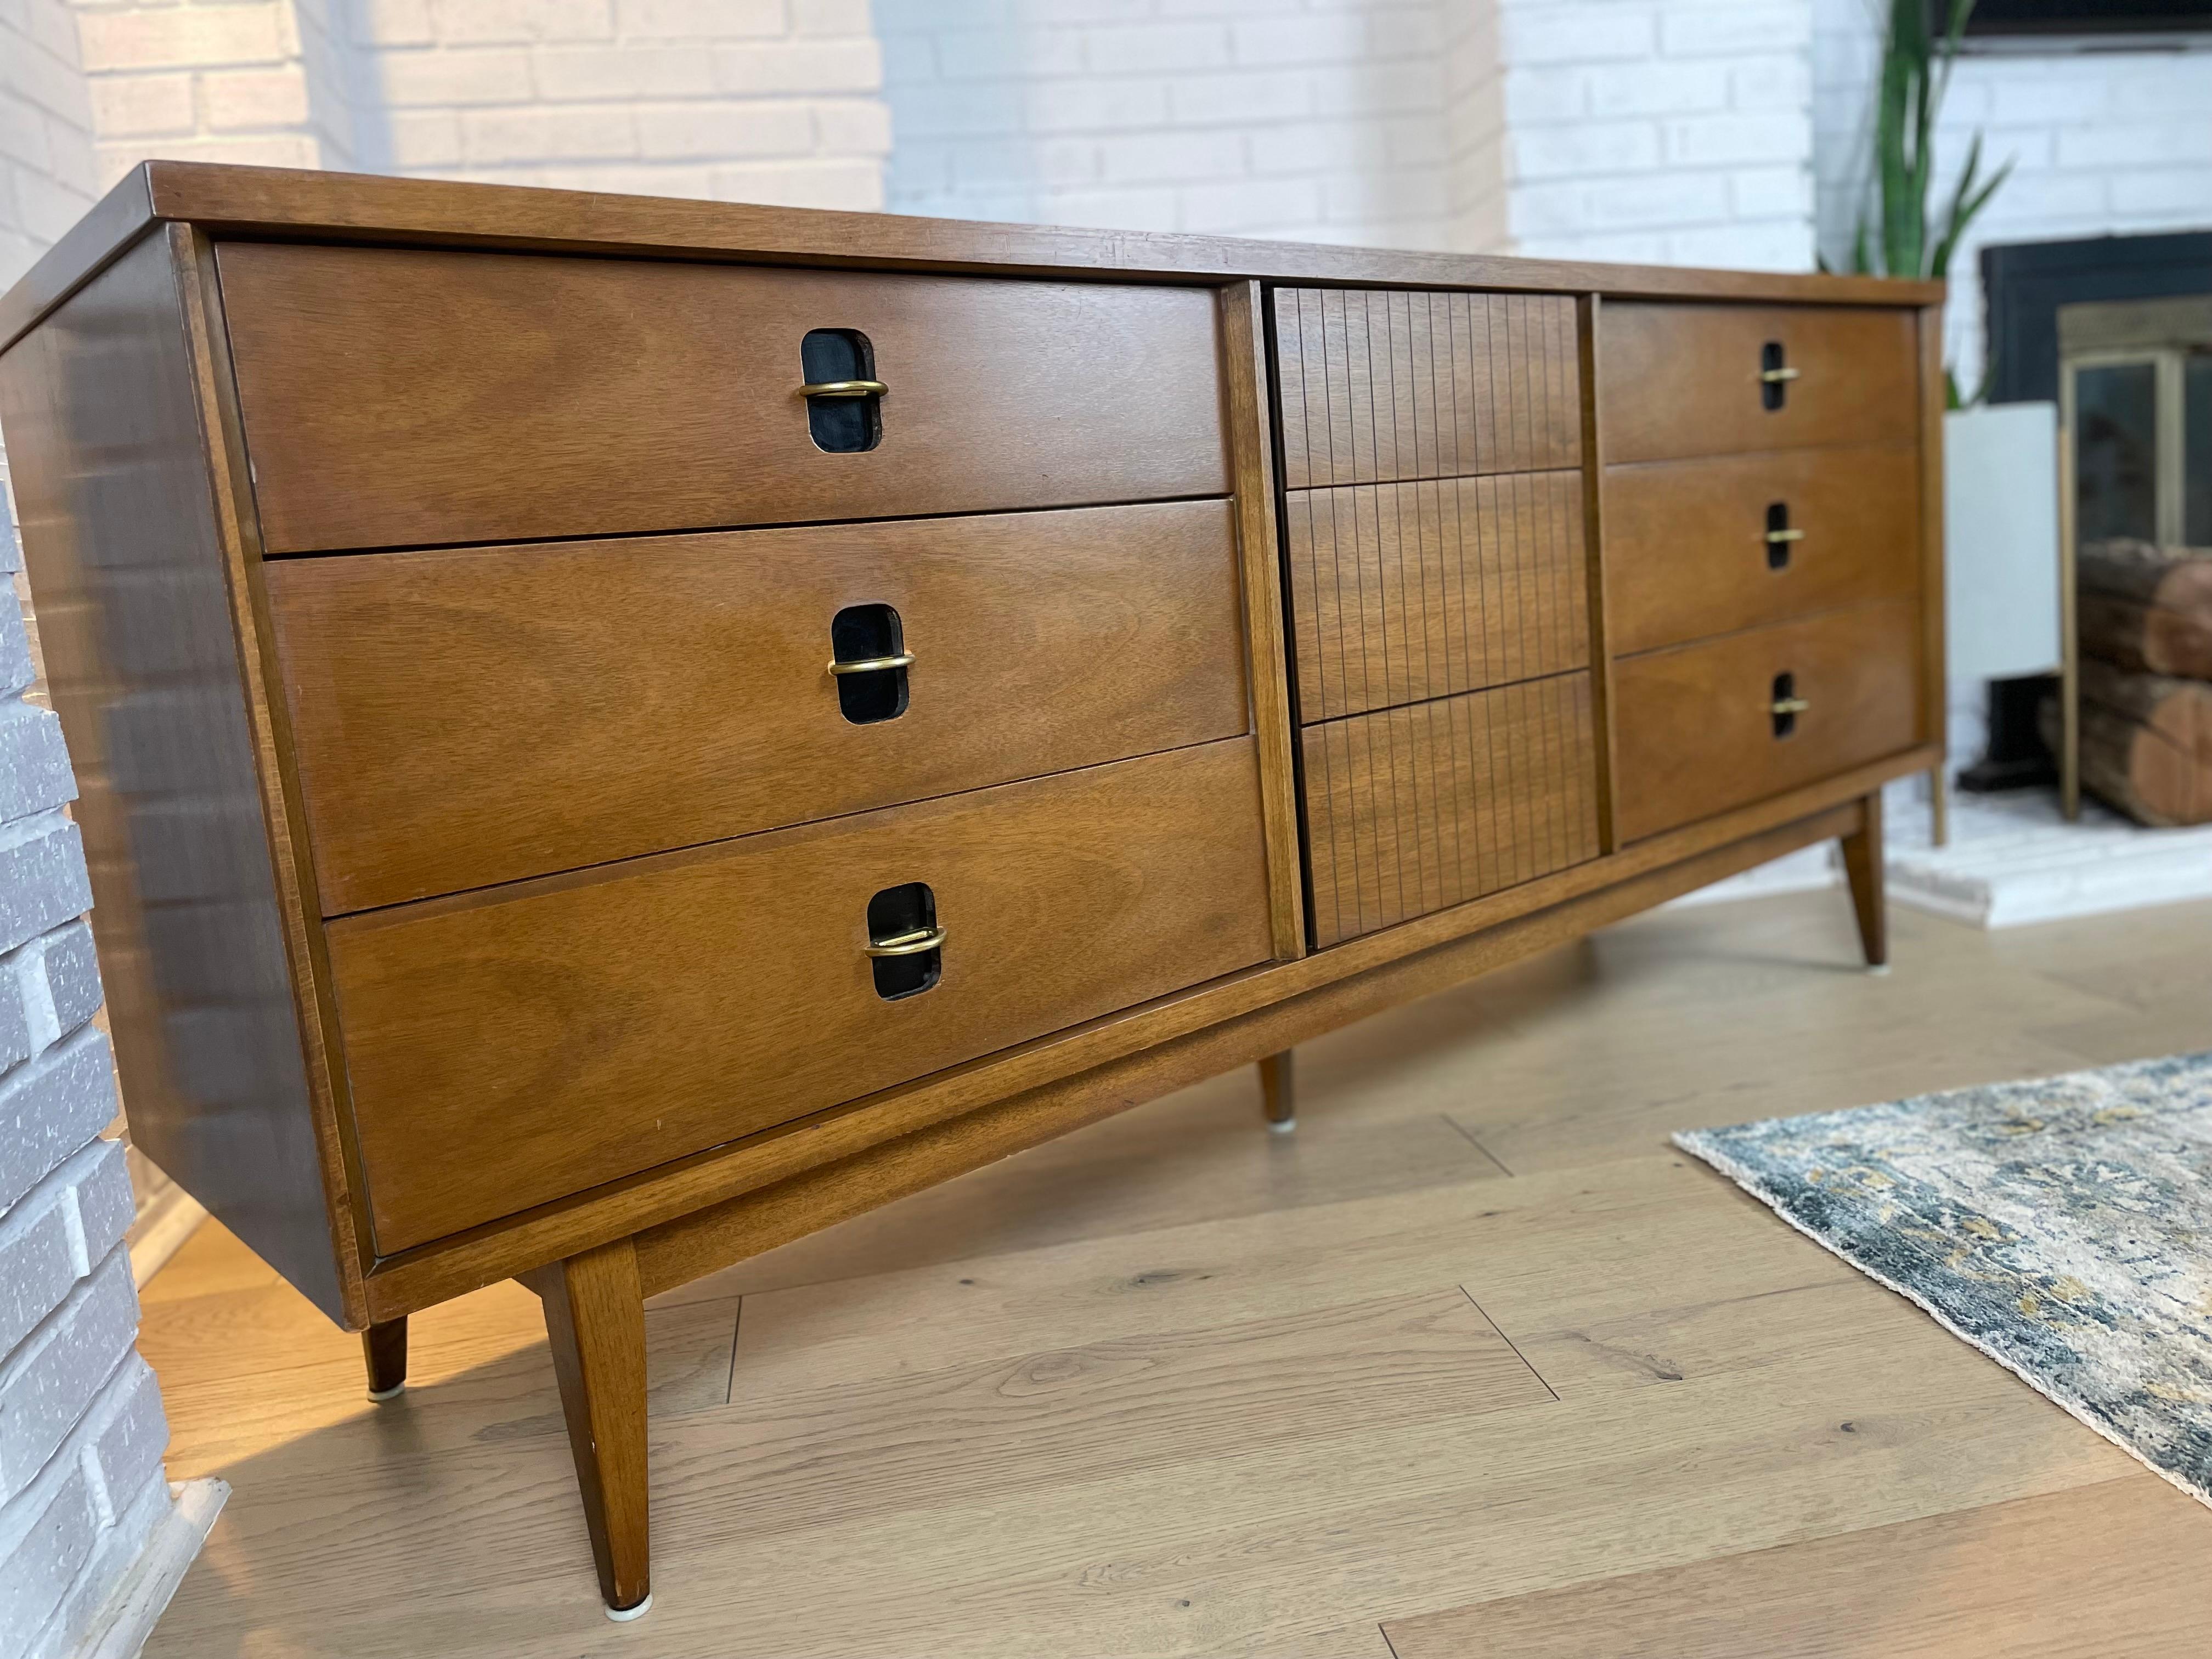 Beautiful Mid-Century Modern Bassett lowboy dresser with 9 drawers (6 long and 3 short drawers) and gorgeous brass handles on the long drawers. This Bassett lowboy dresser is perfect as is and ready for a new home!

Below are specific